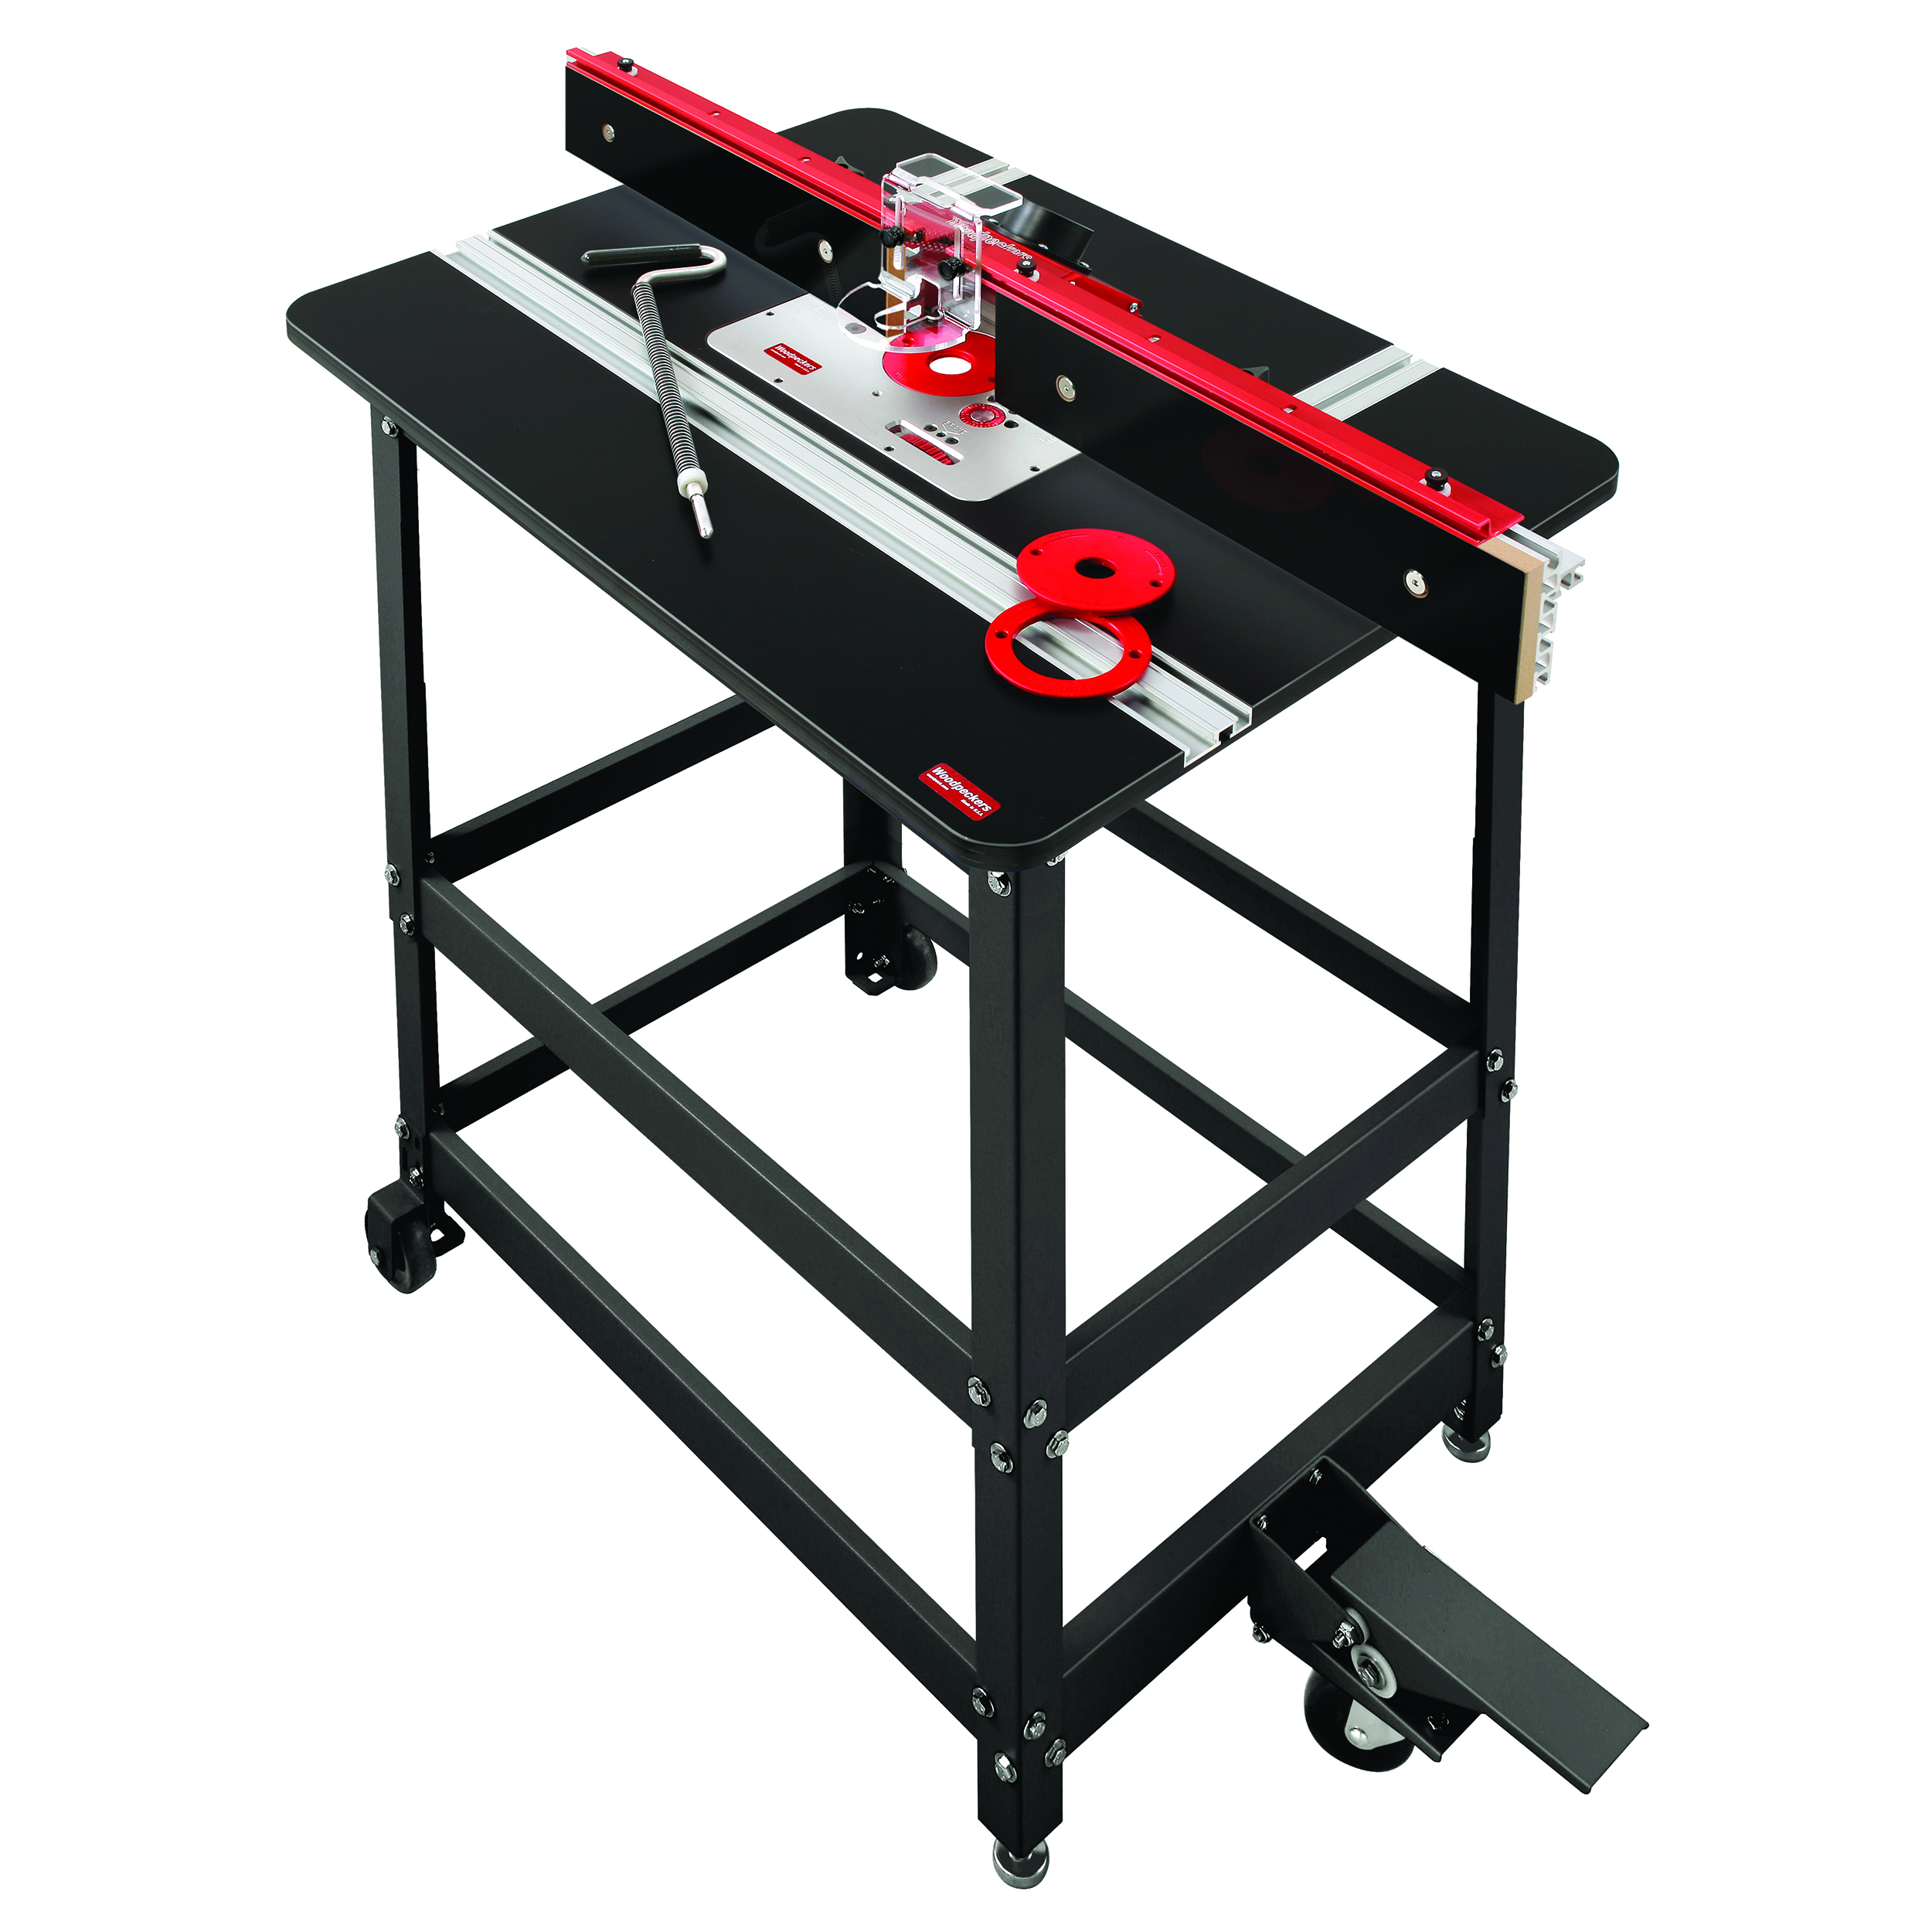 24x32 Premium Router Table Package With V2 420 Router Lift, Wpk# Prp-2-v2420